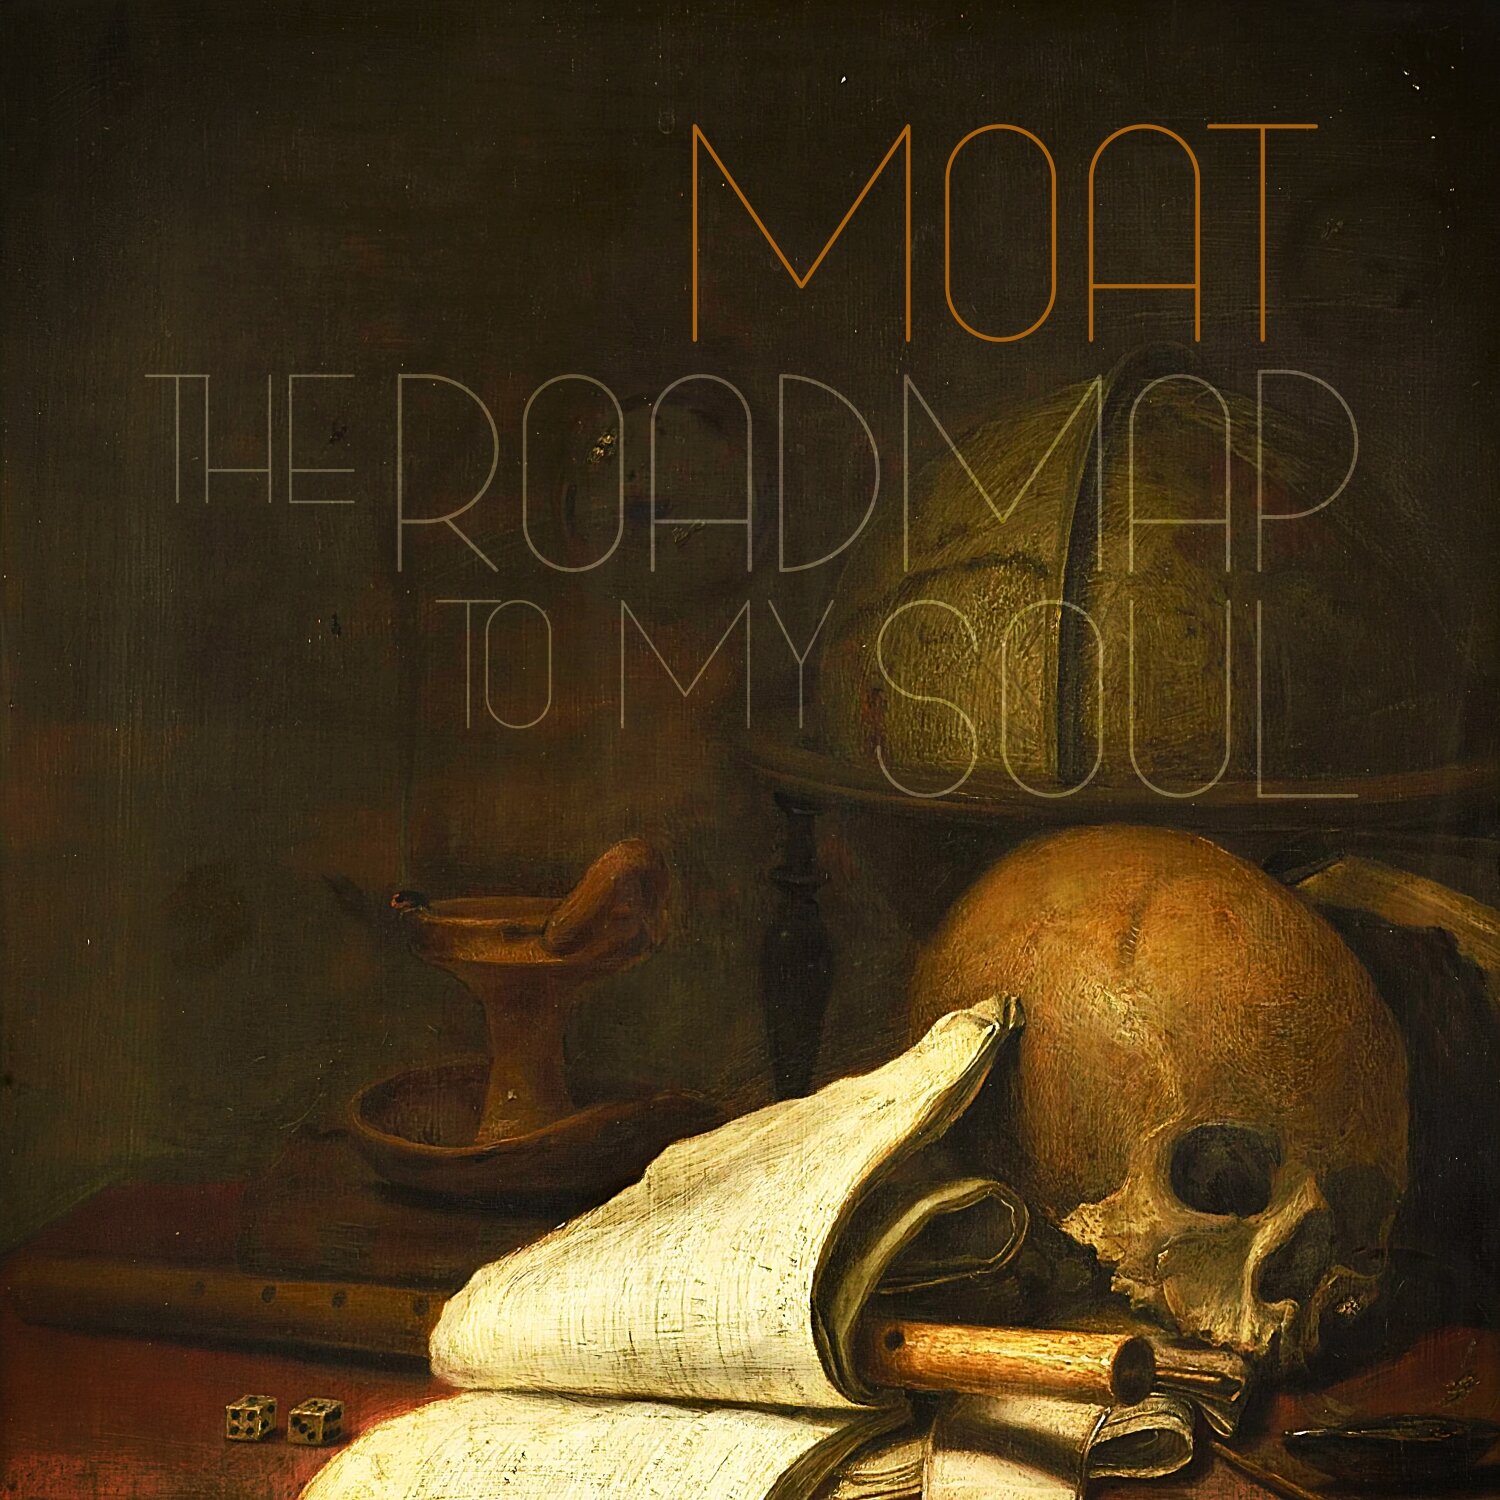 The Roadmap To My Soul_Cover.jpg